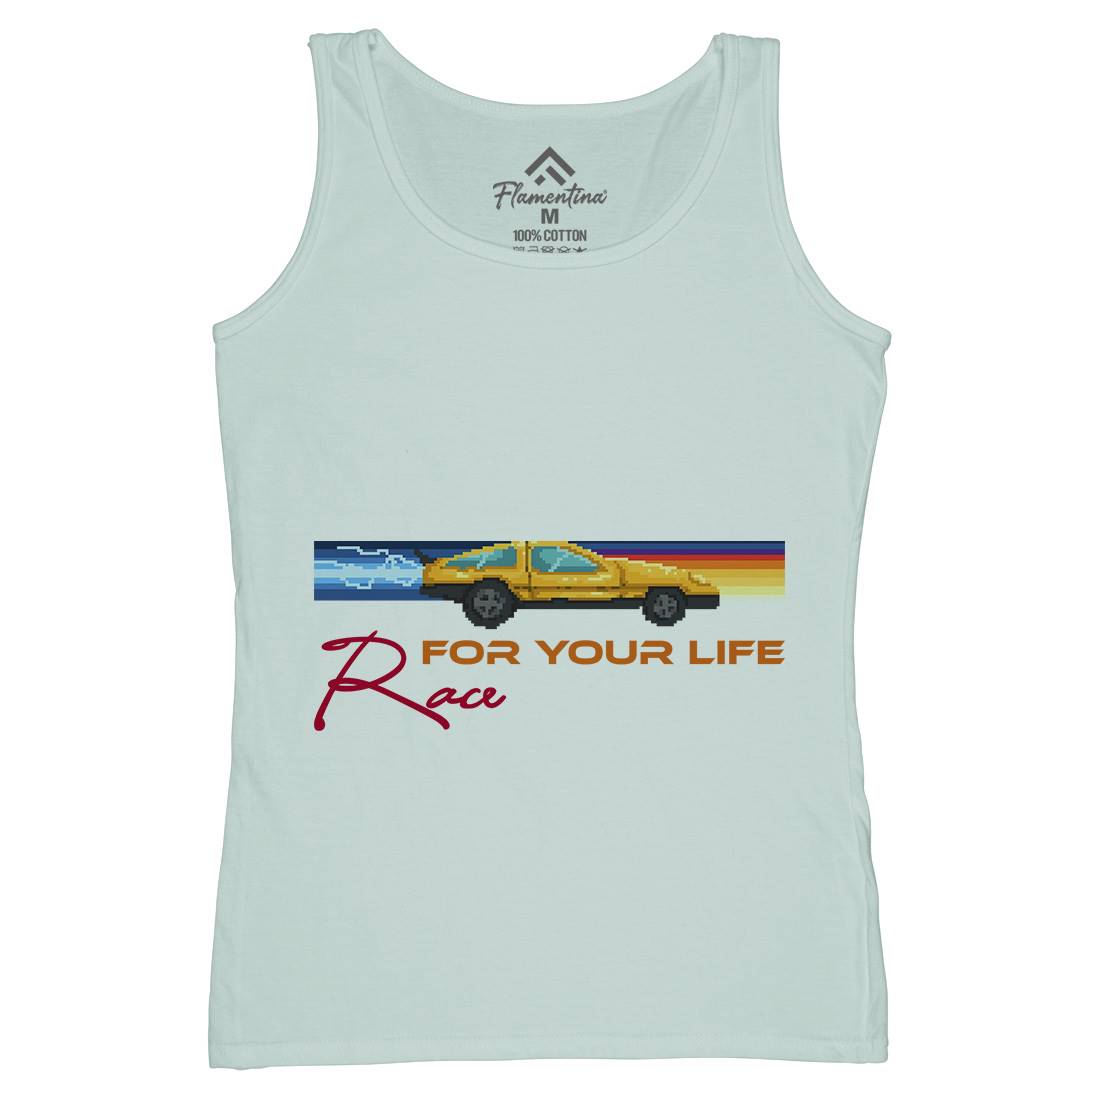 Race For Your Life Womens Organic Tank Top Vest Cars B951